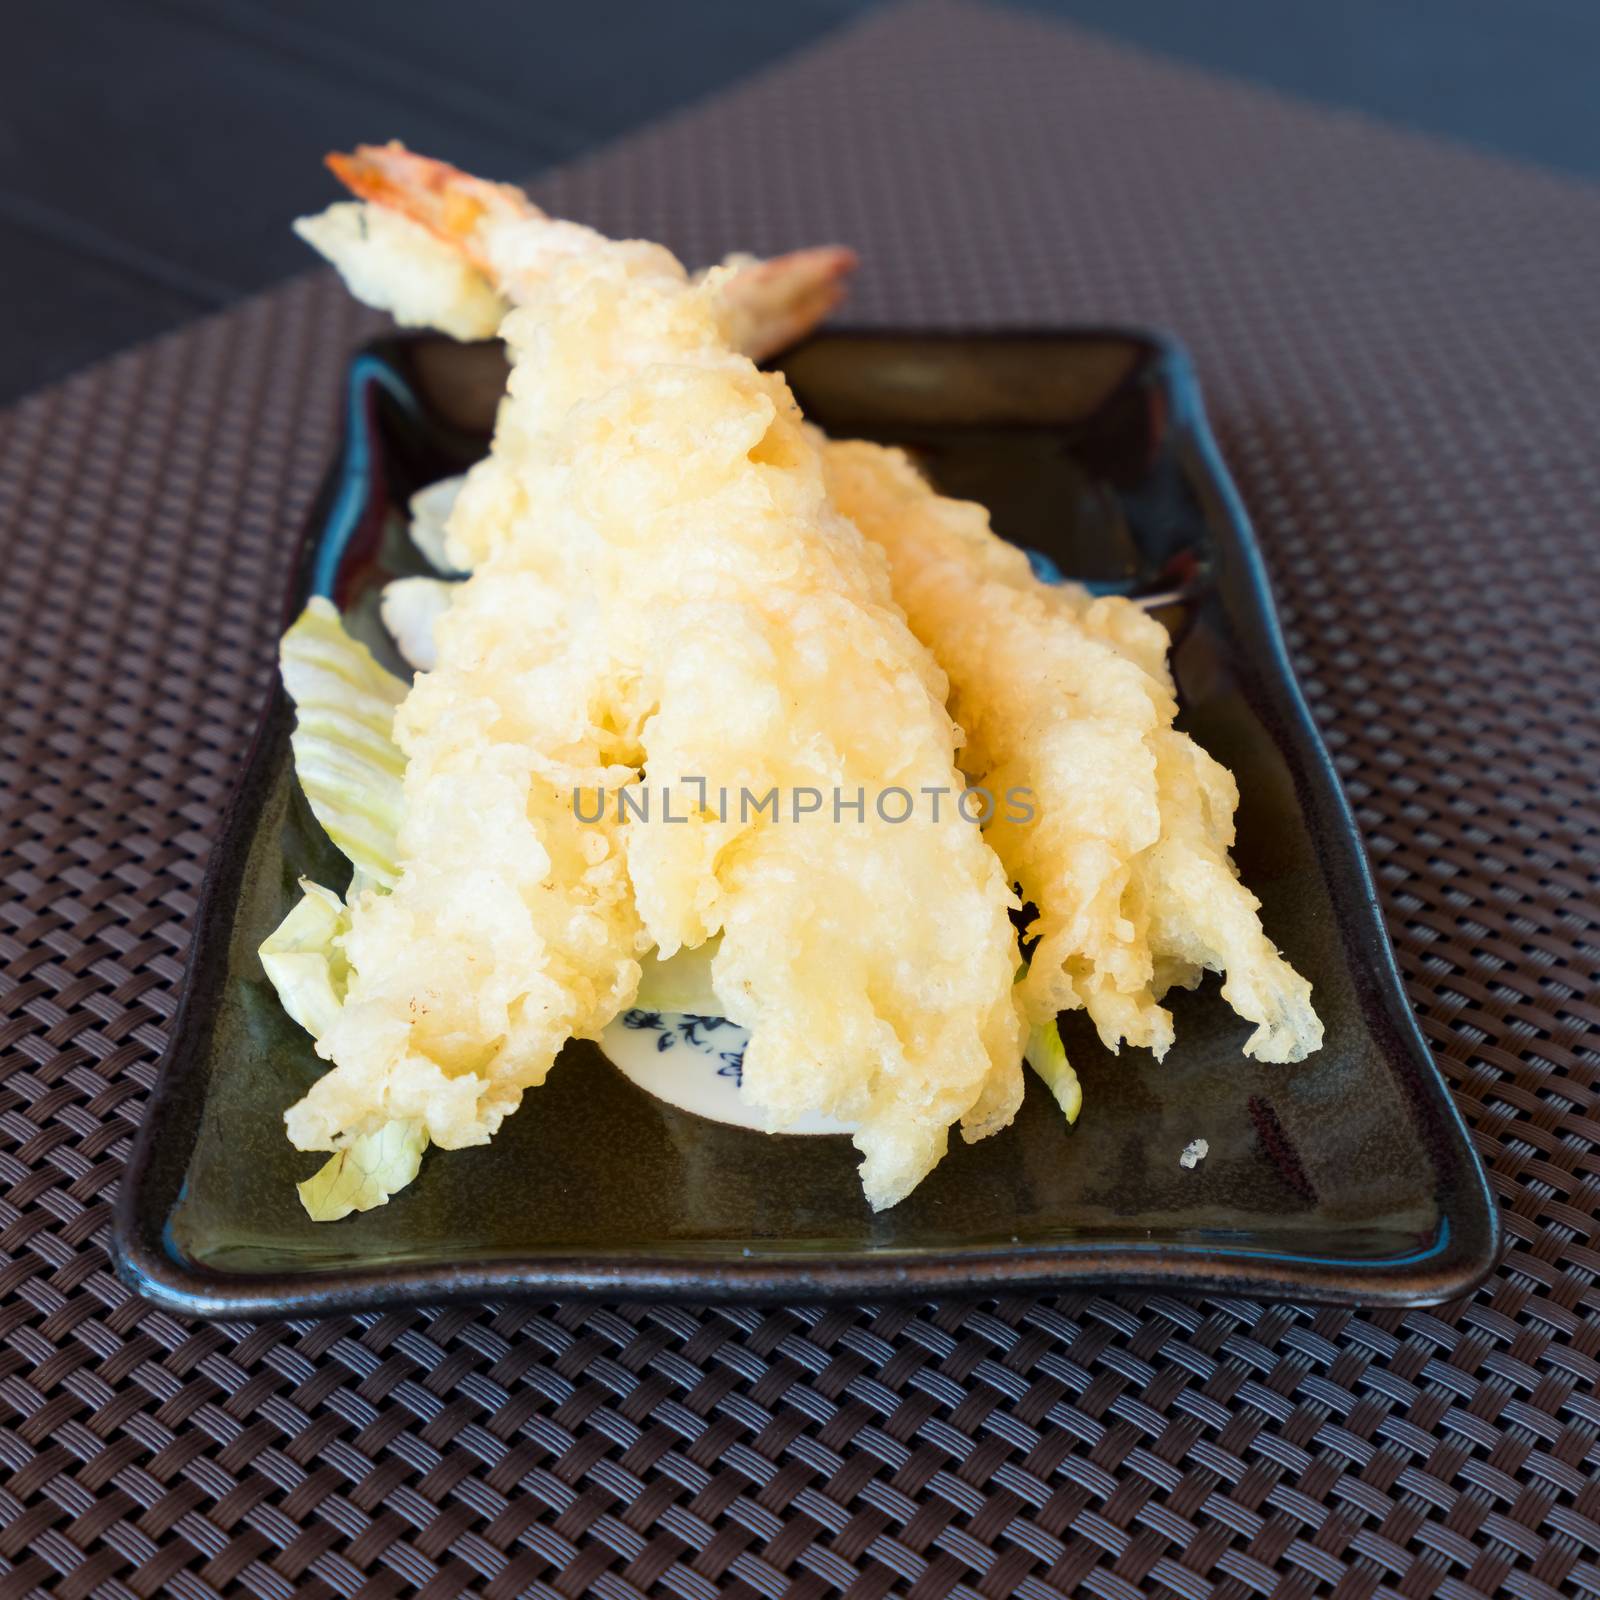 Japanese Cuisine,Tempura Shrimps (Deep Fried Shrimps) with sauce and vegetables on a black plate. Brown  background,shallow depth of field